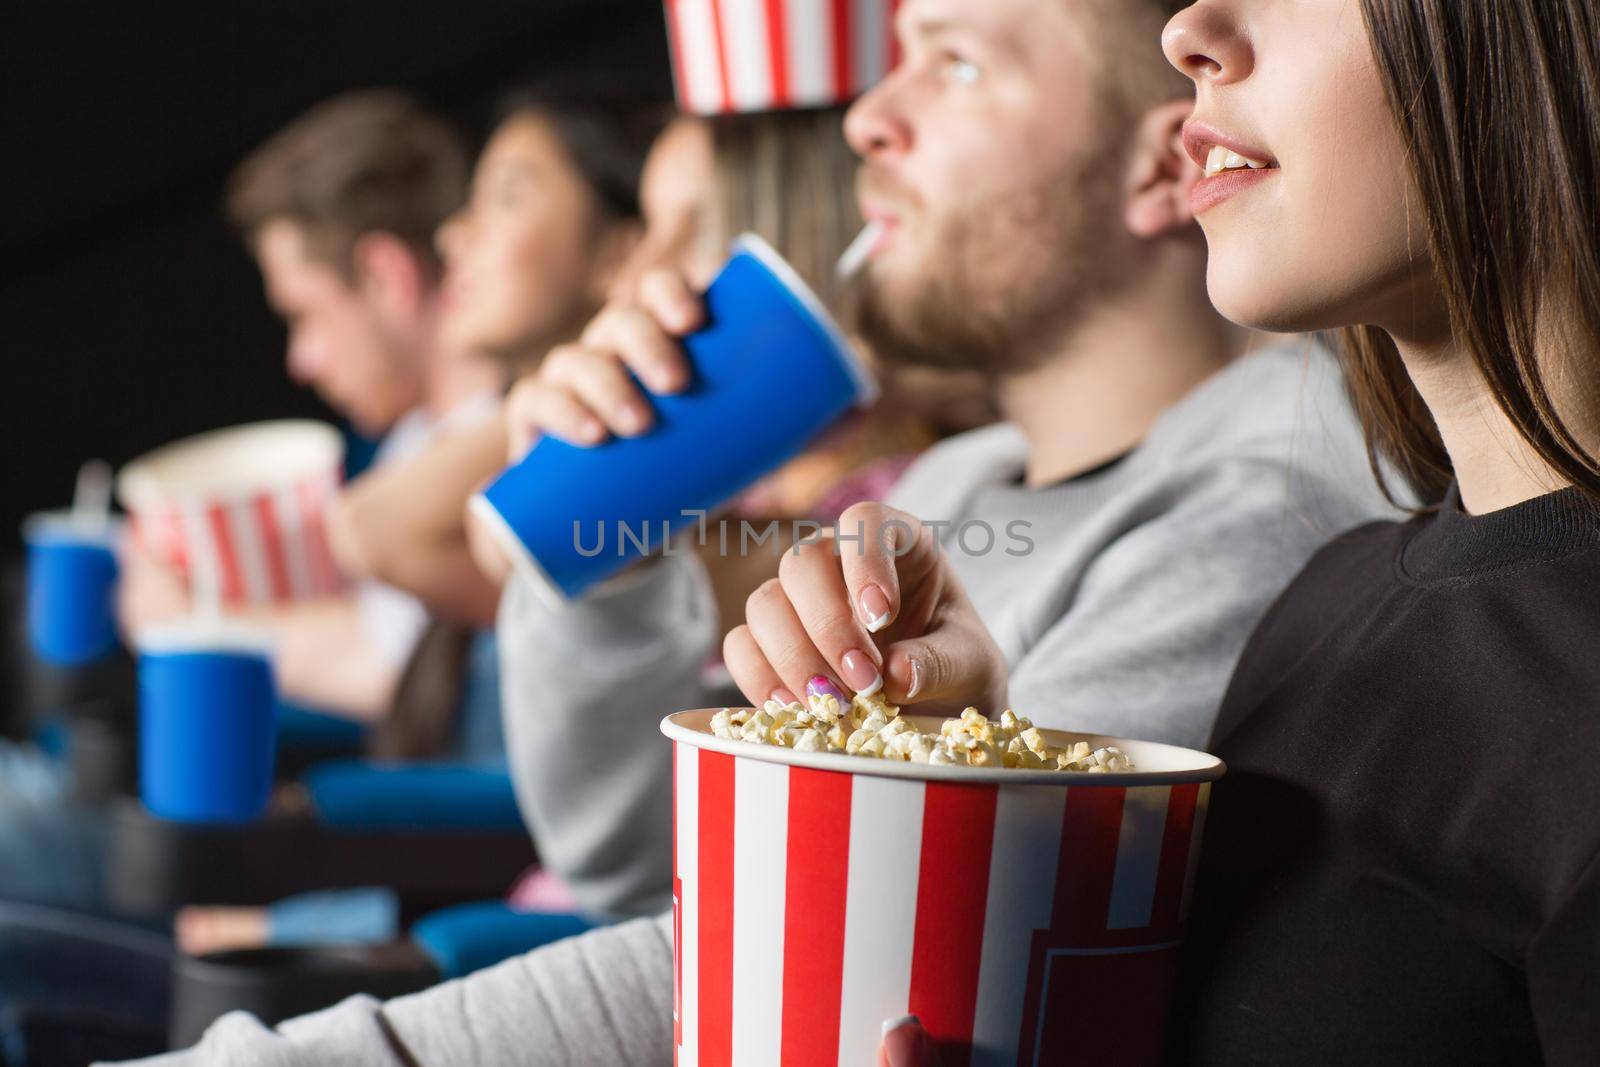 Amazed viewers. Cropped closeup of a young woman grabbing popcorn from a bucket while enjoying movies with her friends at the cinema